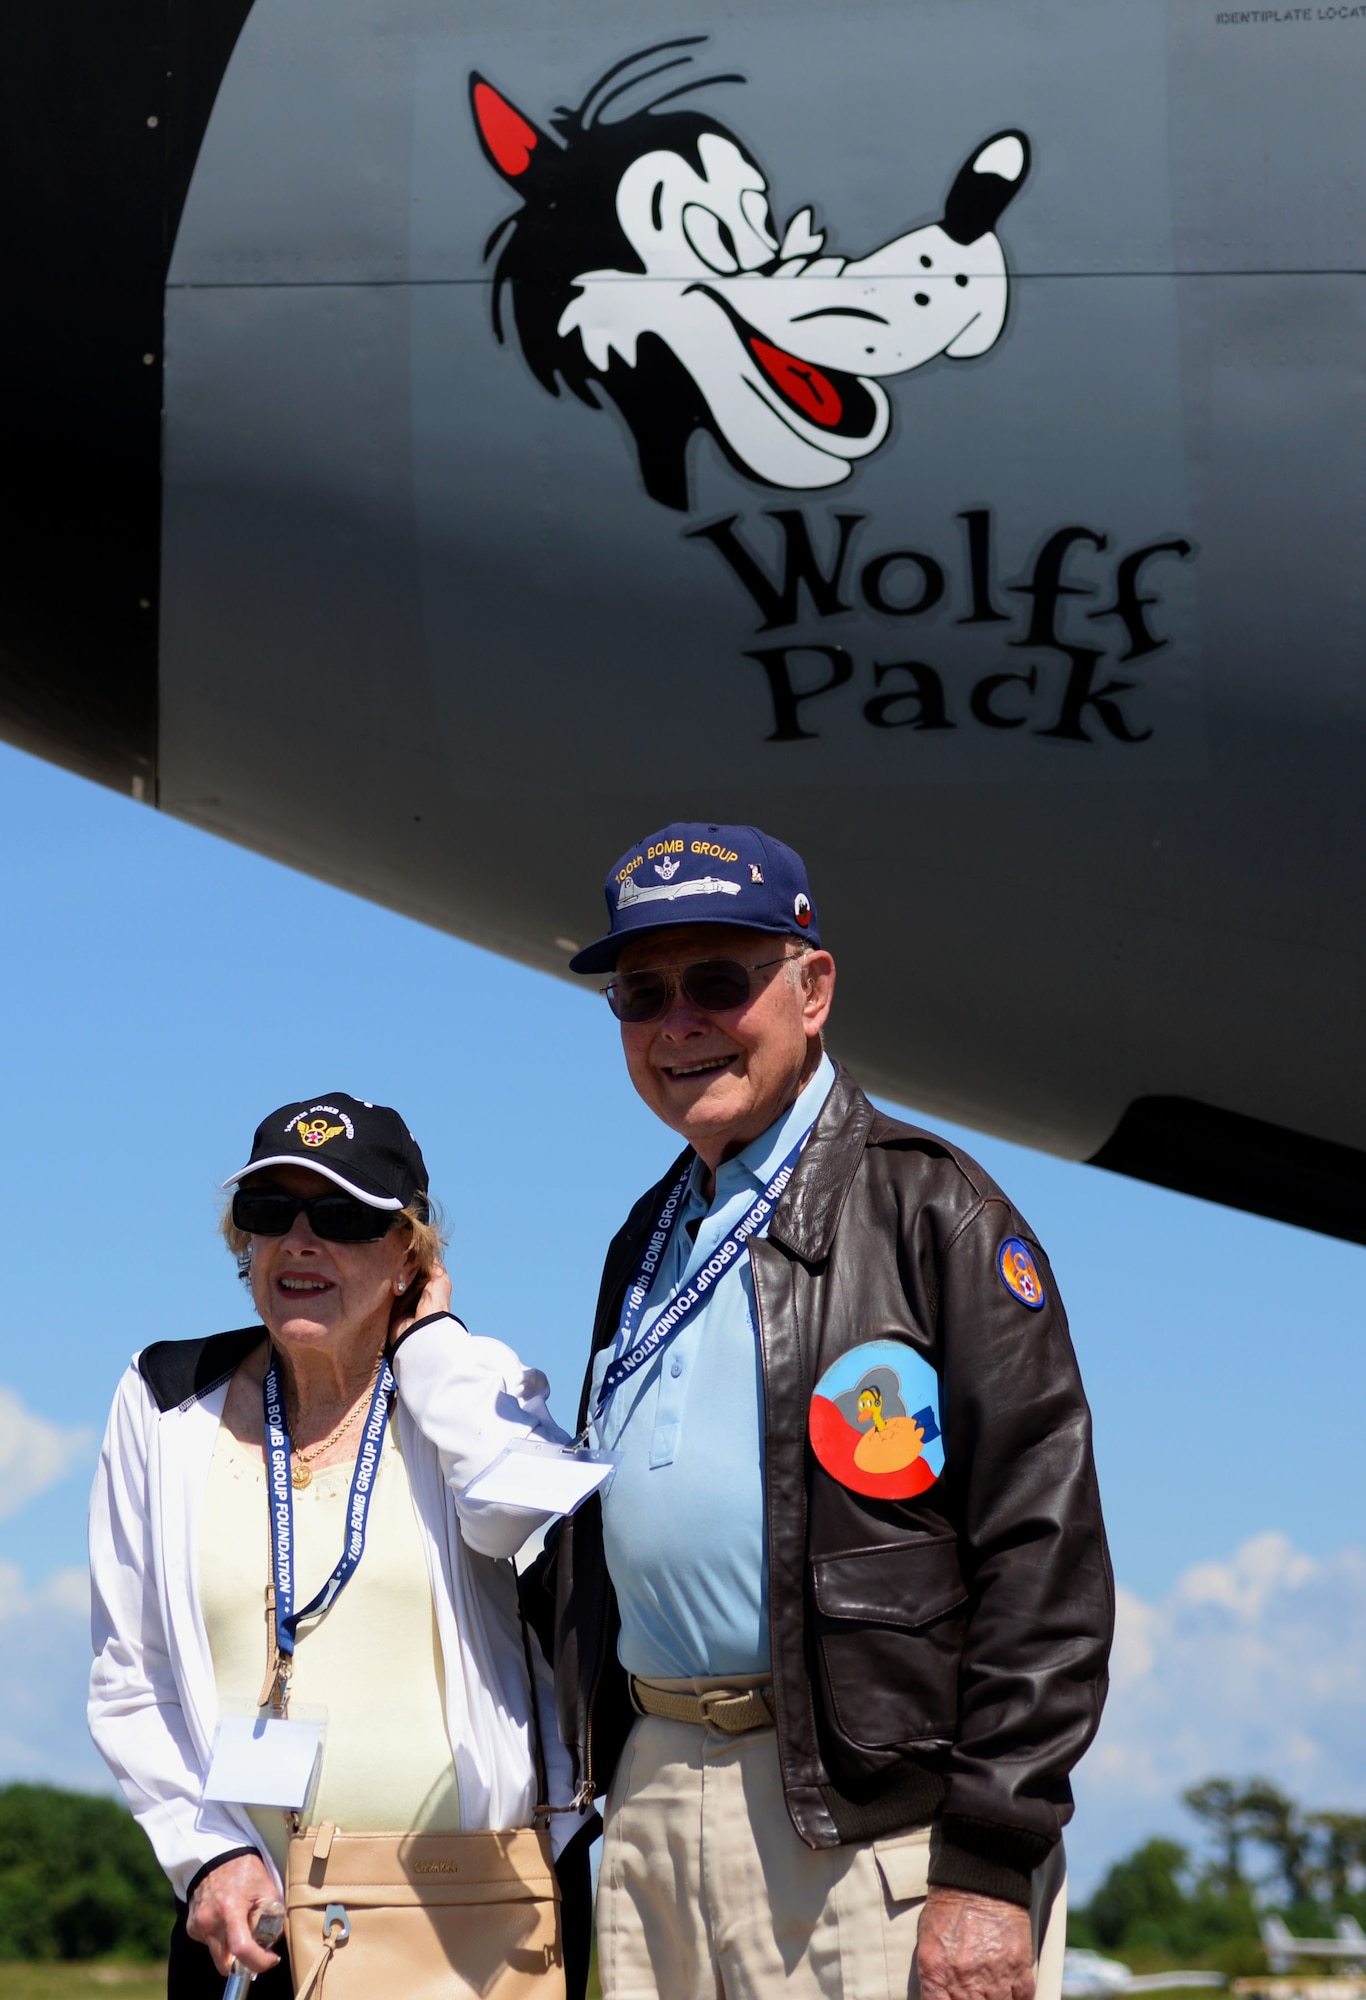 World War ll and 100th Bomb Group veteran Capt. (ret.) Robert “Bob” Wolff, right, poses with his wife Barb, underneath the Wolff Pack nose art on a KC-135 Stratotanker assigned to RAF Mildenhall, England, at a static display during the 100th Bomb Group reunion at Louis Armstrong New Orleans International Airport in New Orleans, La., Sept. 24, 2015. Bob was a B-17 Flying Fortress pilot while stationed at Thorpe Abbots, England, during World War ll. (U.S. Air Force photo by then-Senior Airman Victoria H. Taylor)